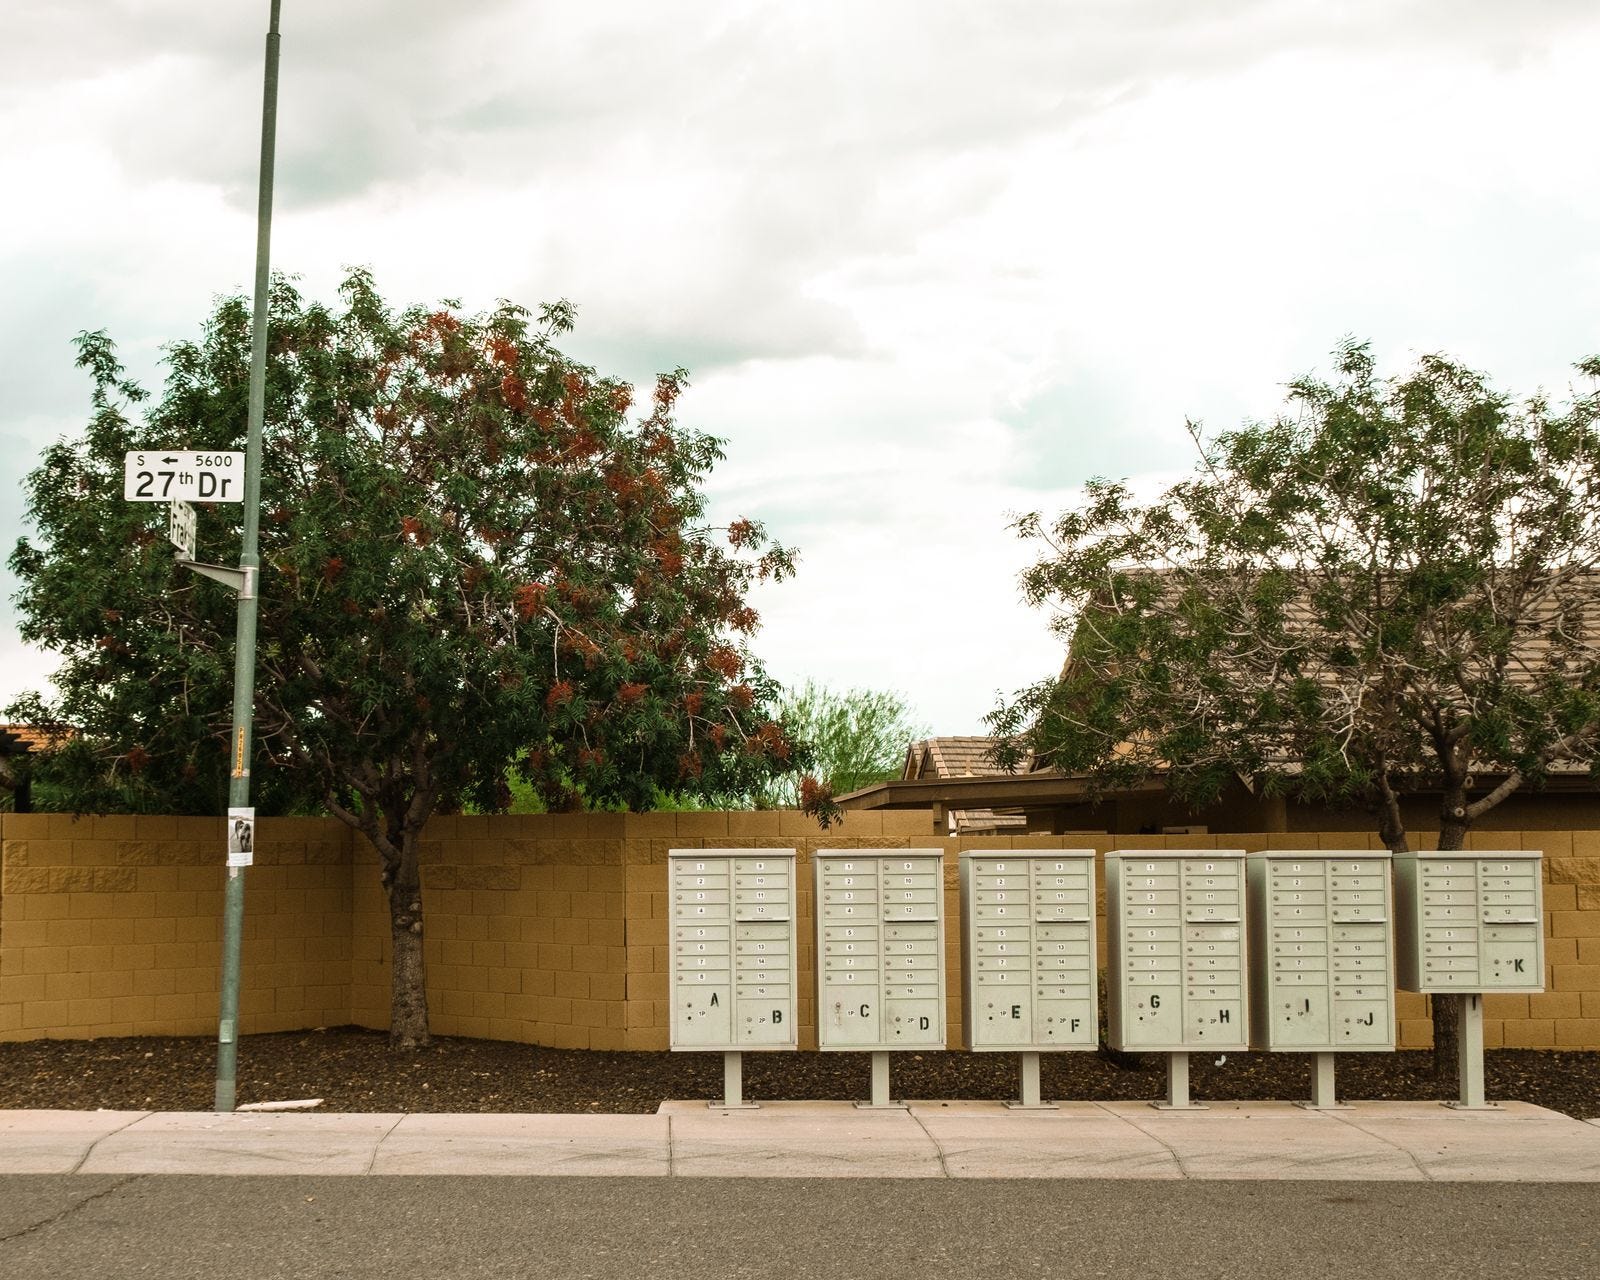 A residential development in South Phoenix, a historically Black neighborhood in the city. Many Black families first moved to the area as a result of redlining and racial covenants that blocked them from renting or owning property elsewhere.